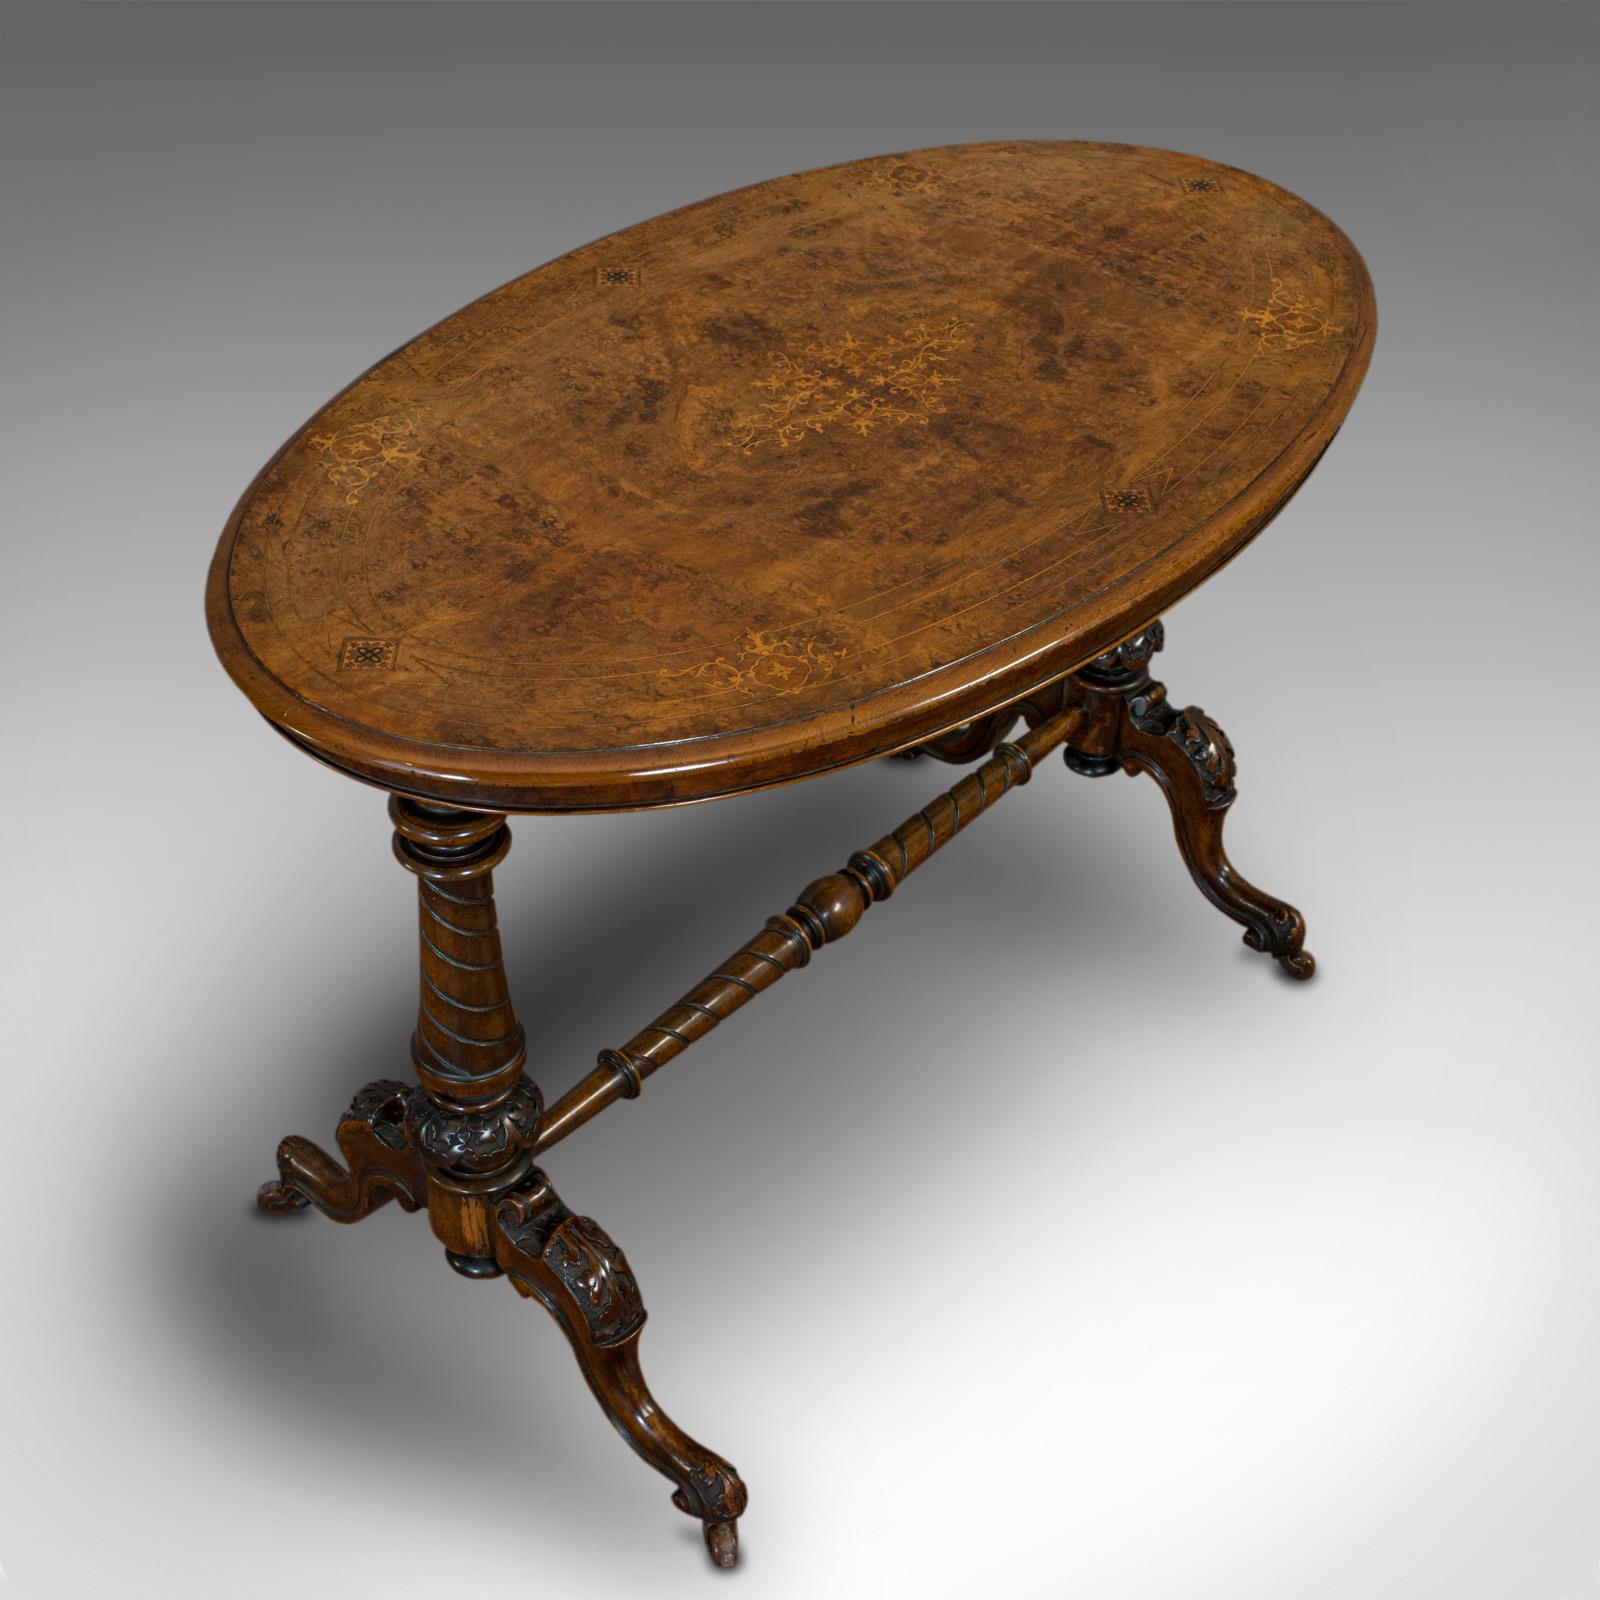 Antique Oval Table, English, Burr Walnut, Centre, Side, Victorian, circa 1870 In Good Condition For Sale In Hele, Devon, GB